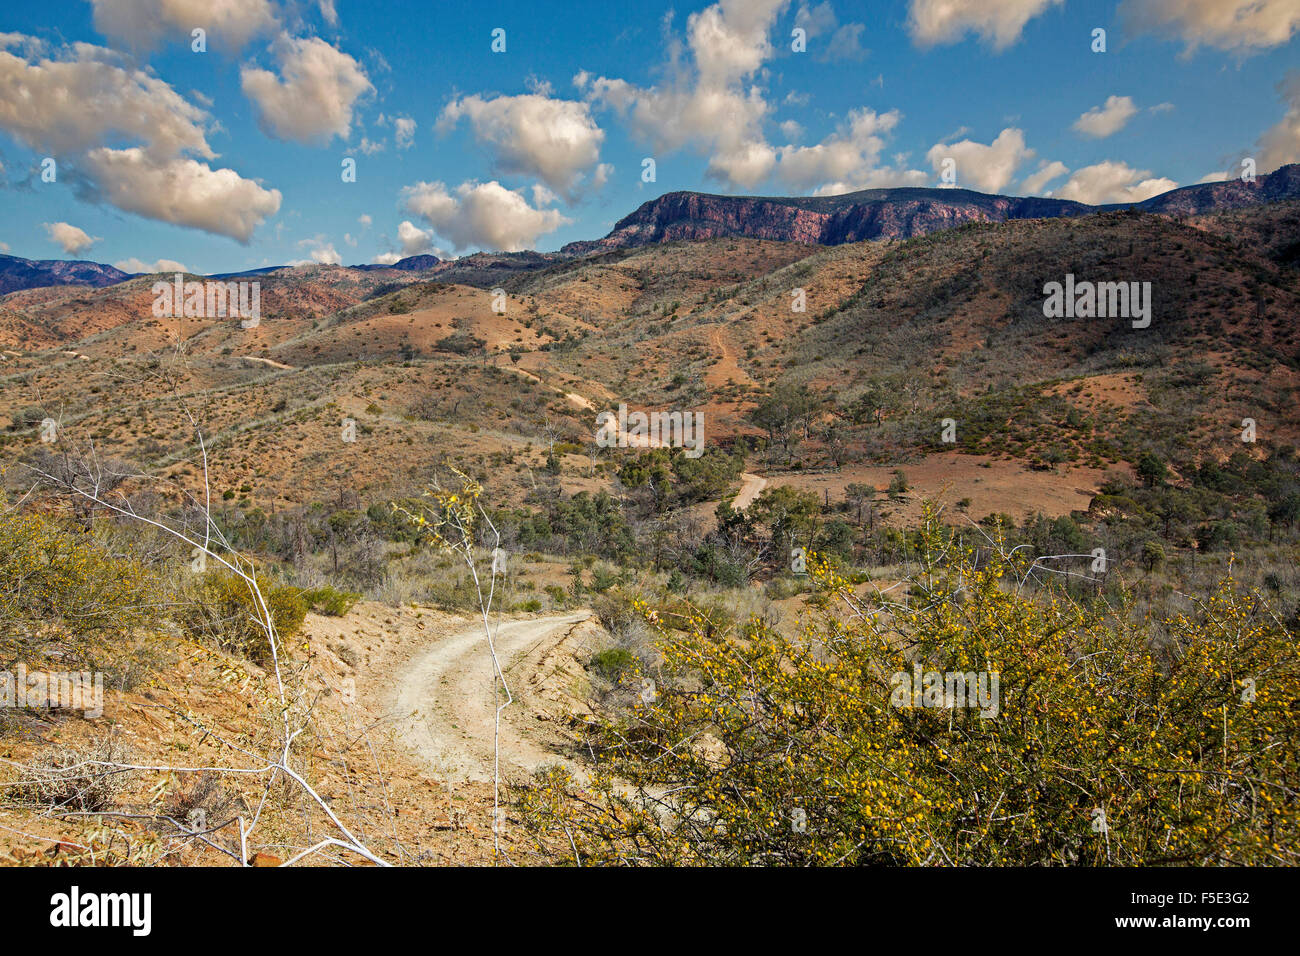 Long winding road snaking across barren hilly landscape of Gammon Ranges National Park under blue sky in outback South Australia Stock Photo